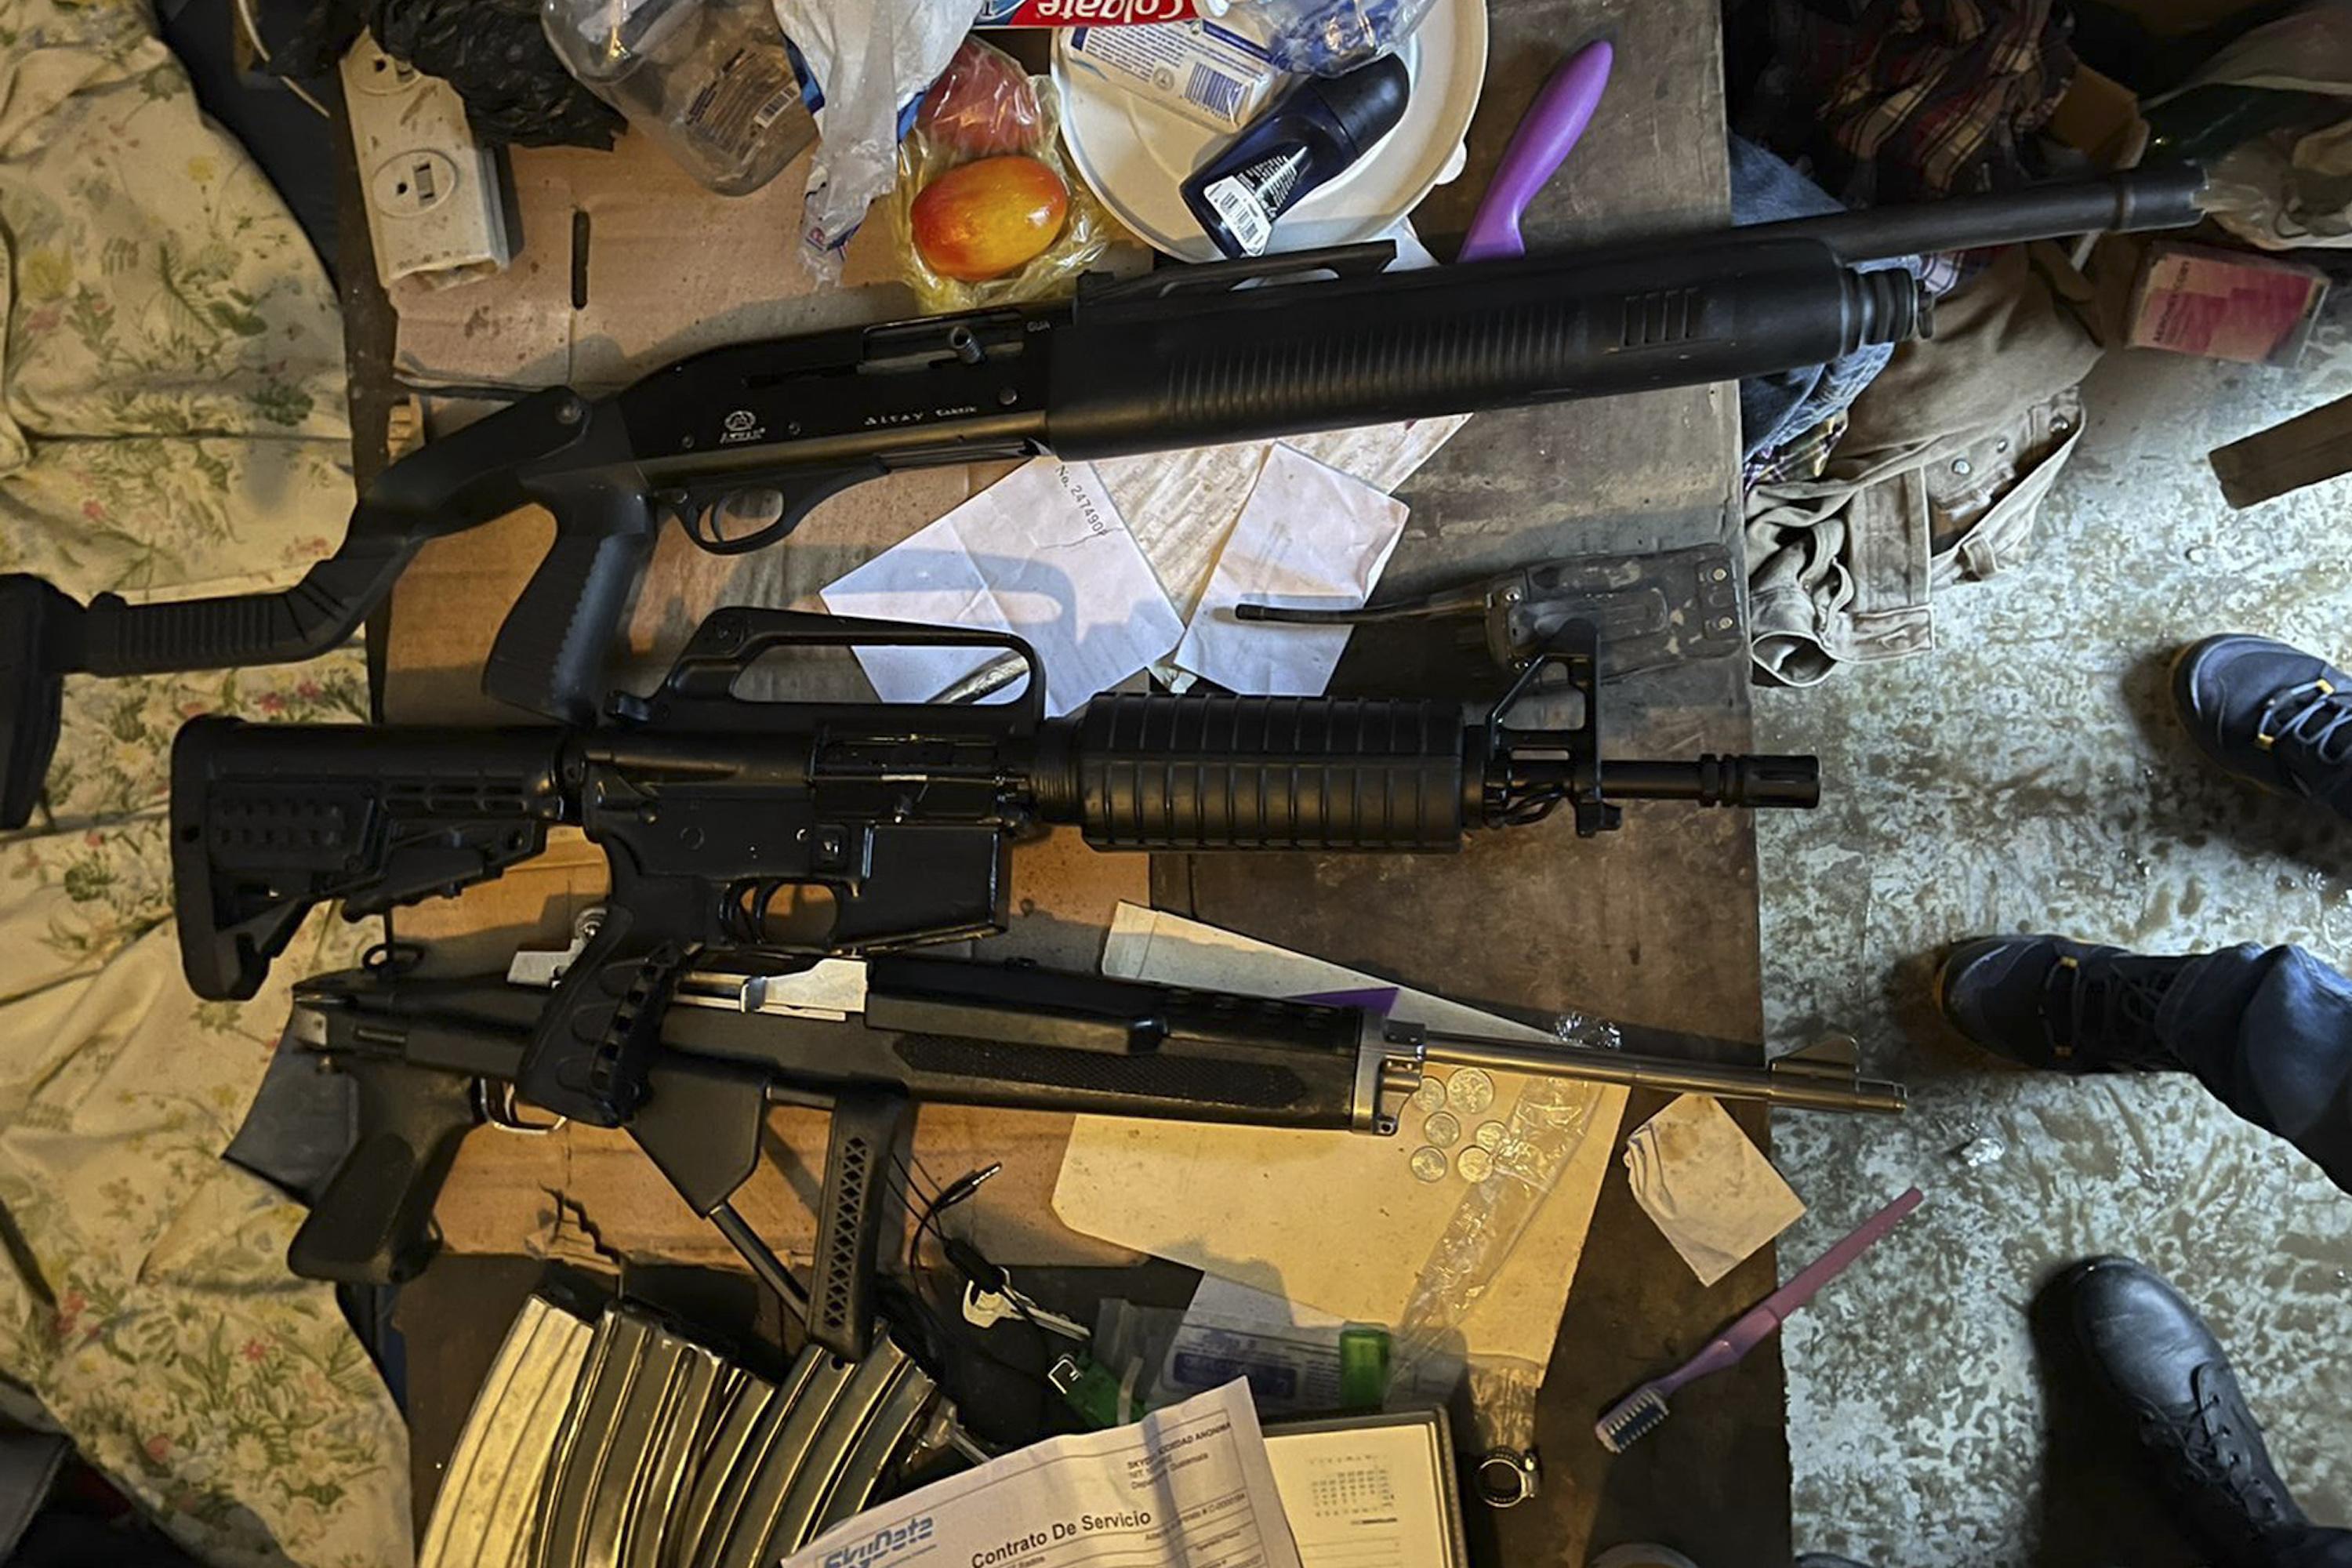 Weapons seized in an operation by the Guatemalan Prosecutor